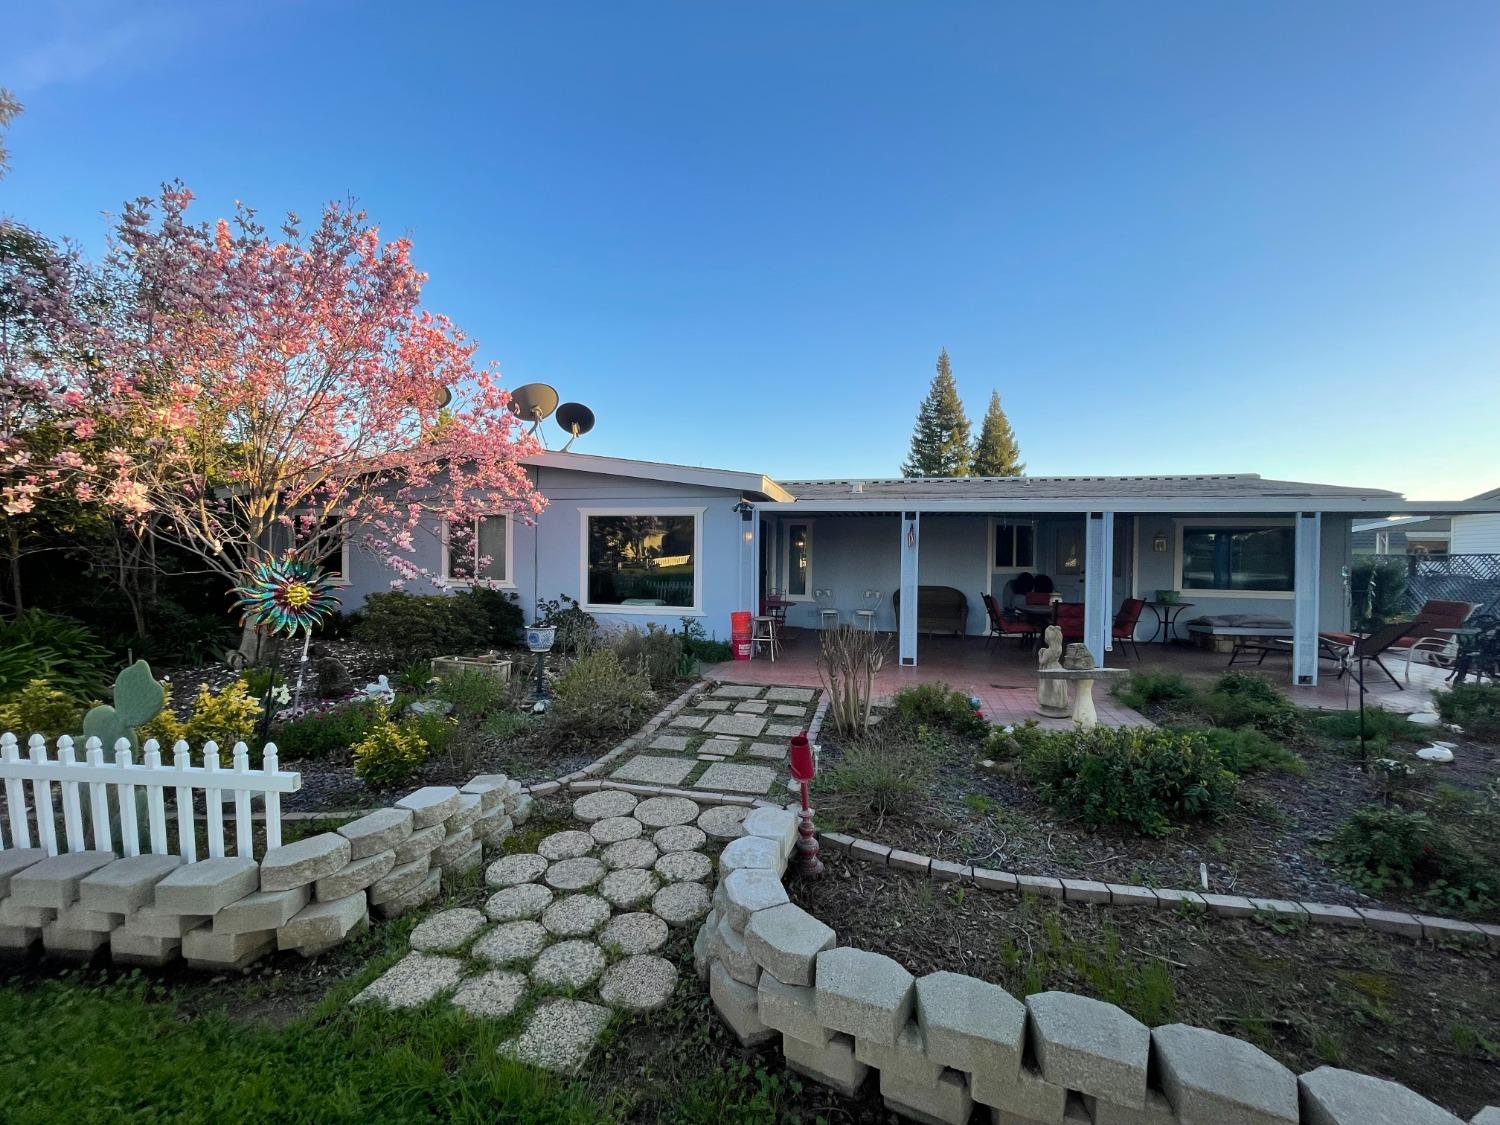 Photo of 6653 Silver Springs Ct in Citrus Heights, CA